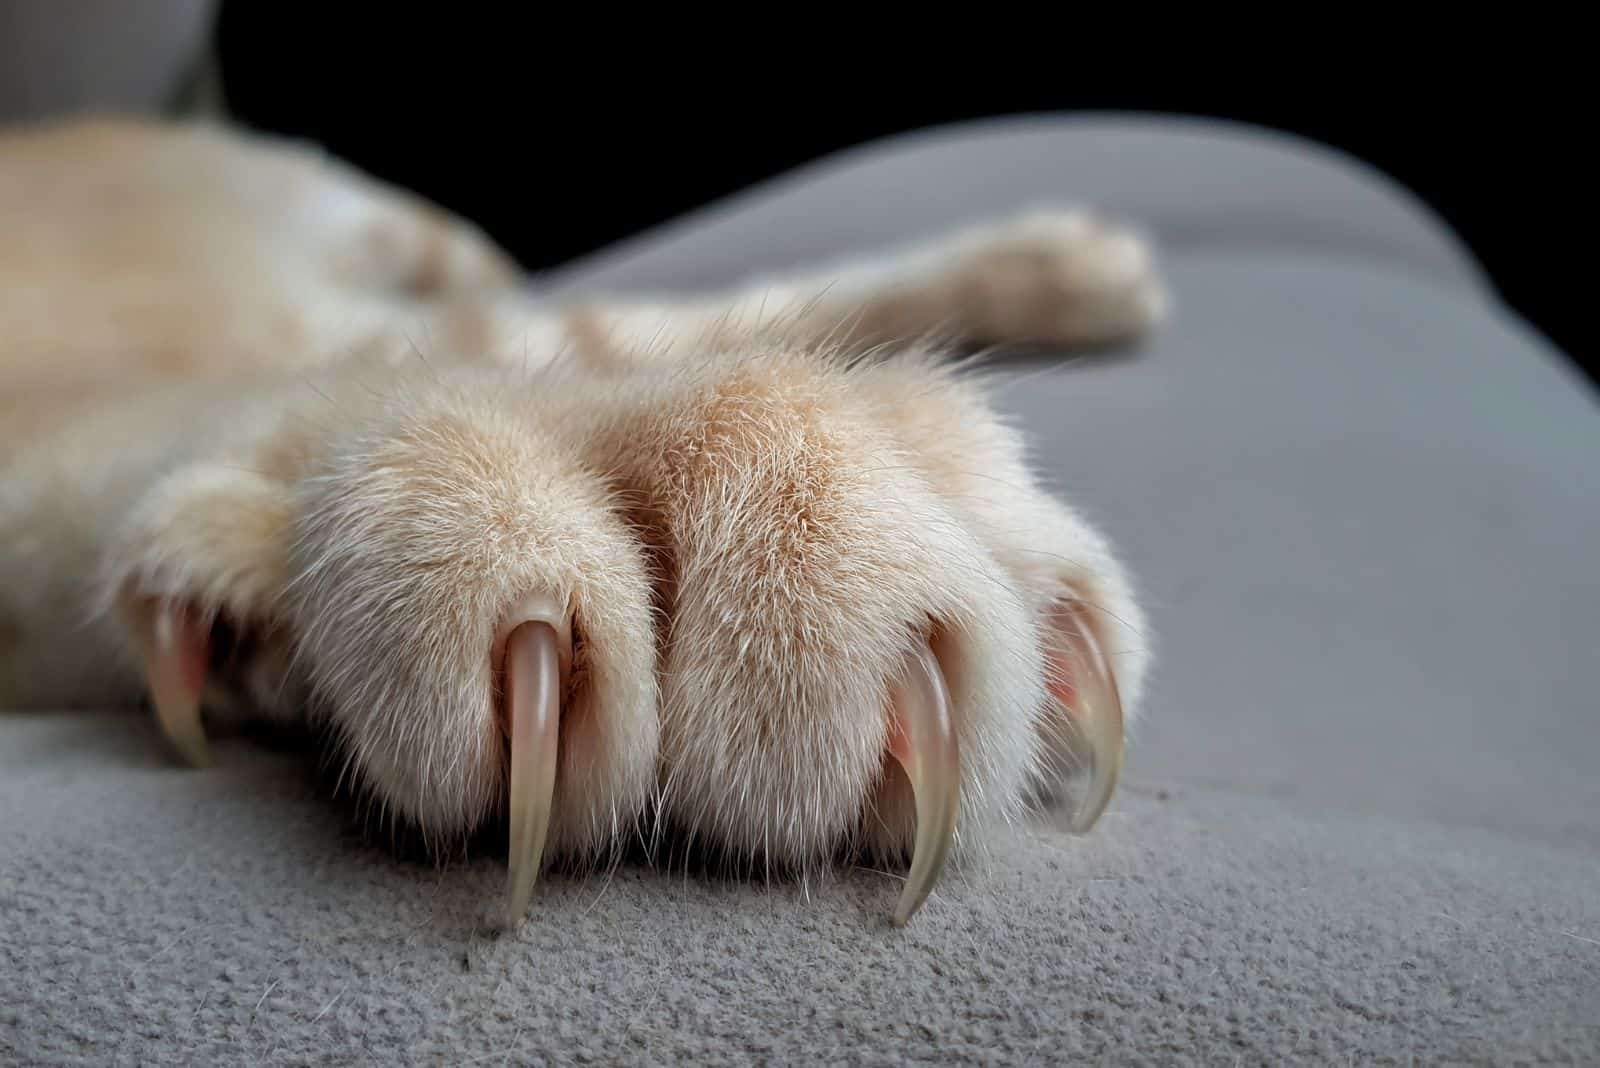 cat's paw with claws